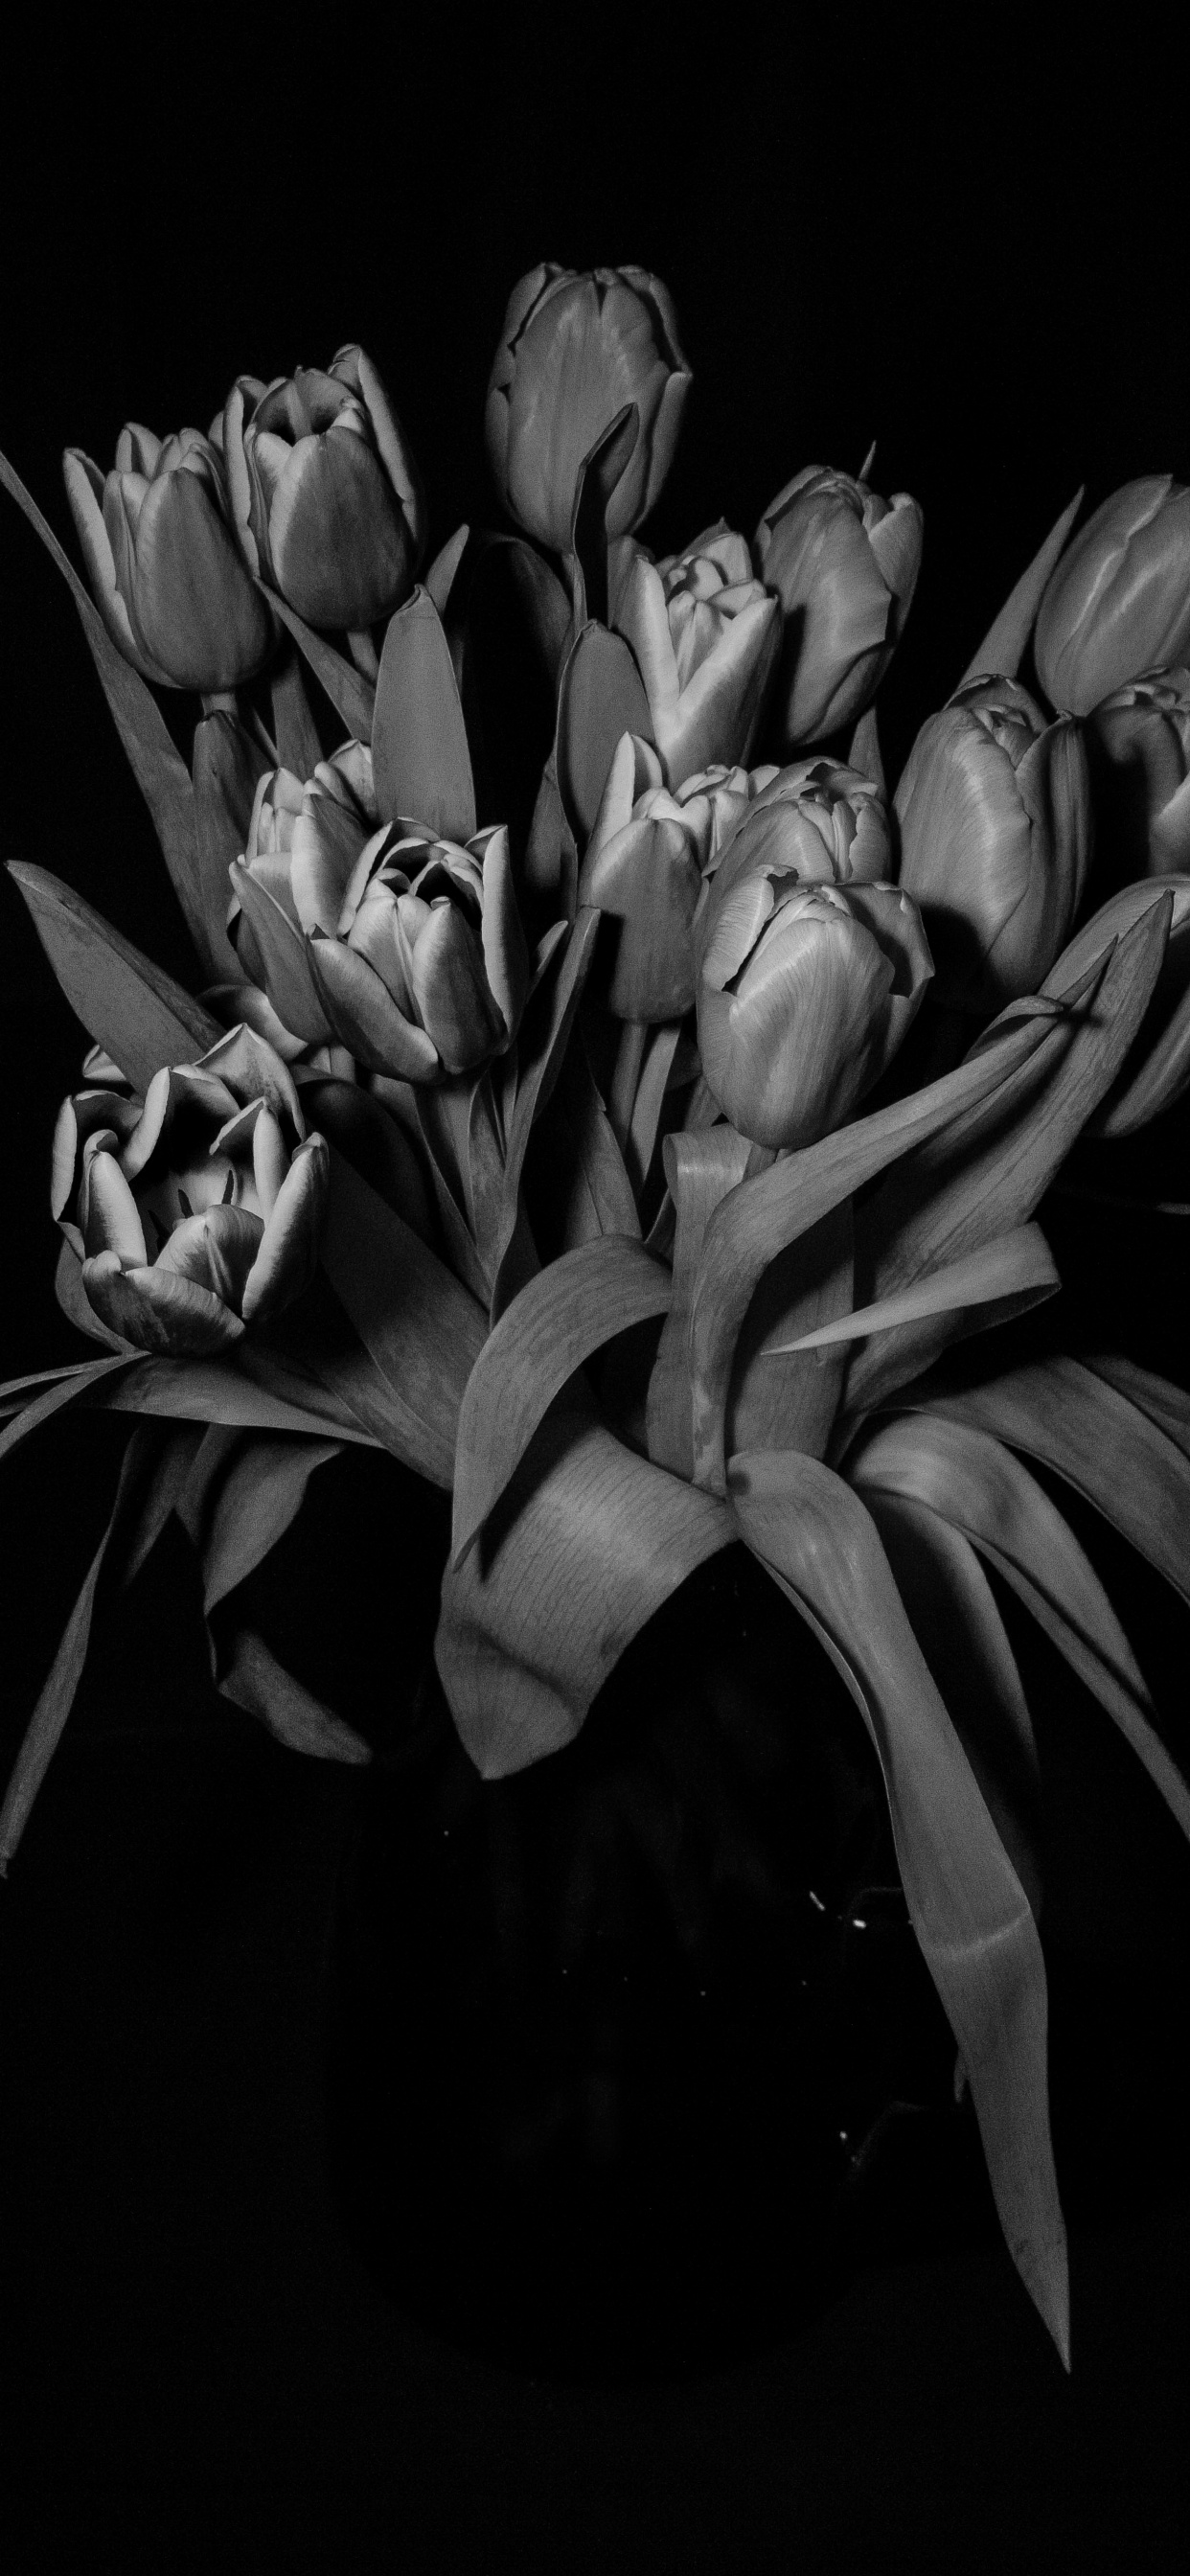 Grayscale Photo of Tulips in Bloom. Wallpaper in 1242x2688 Resolution